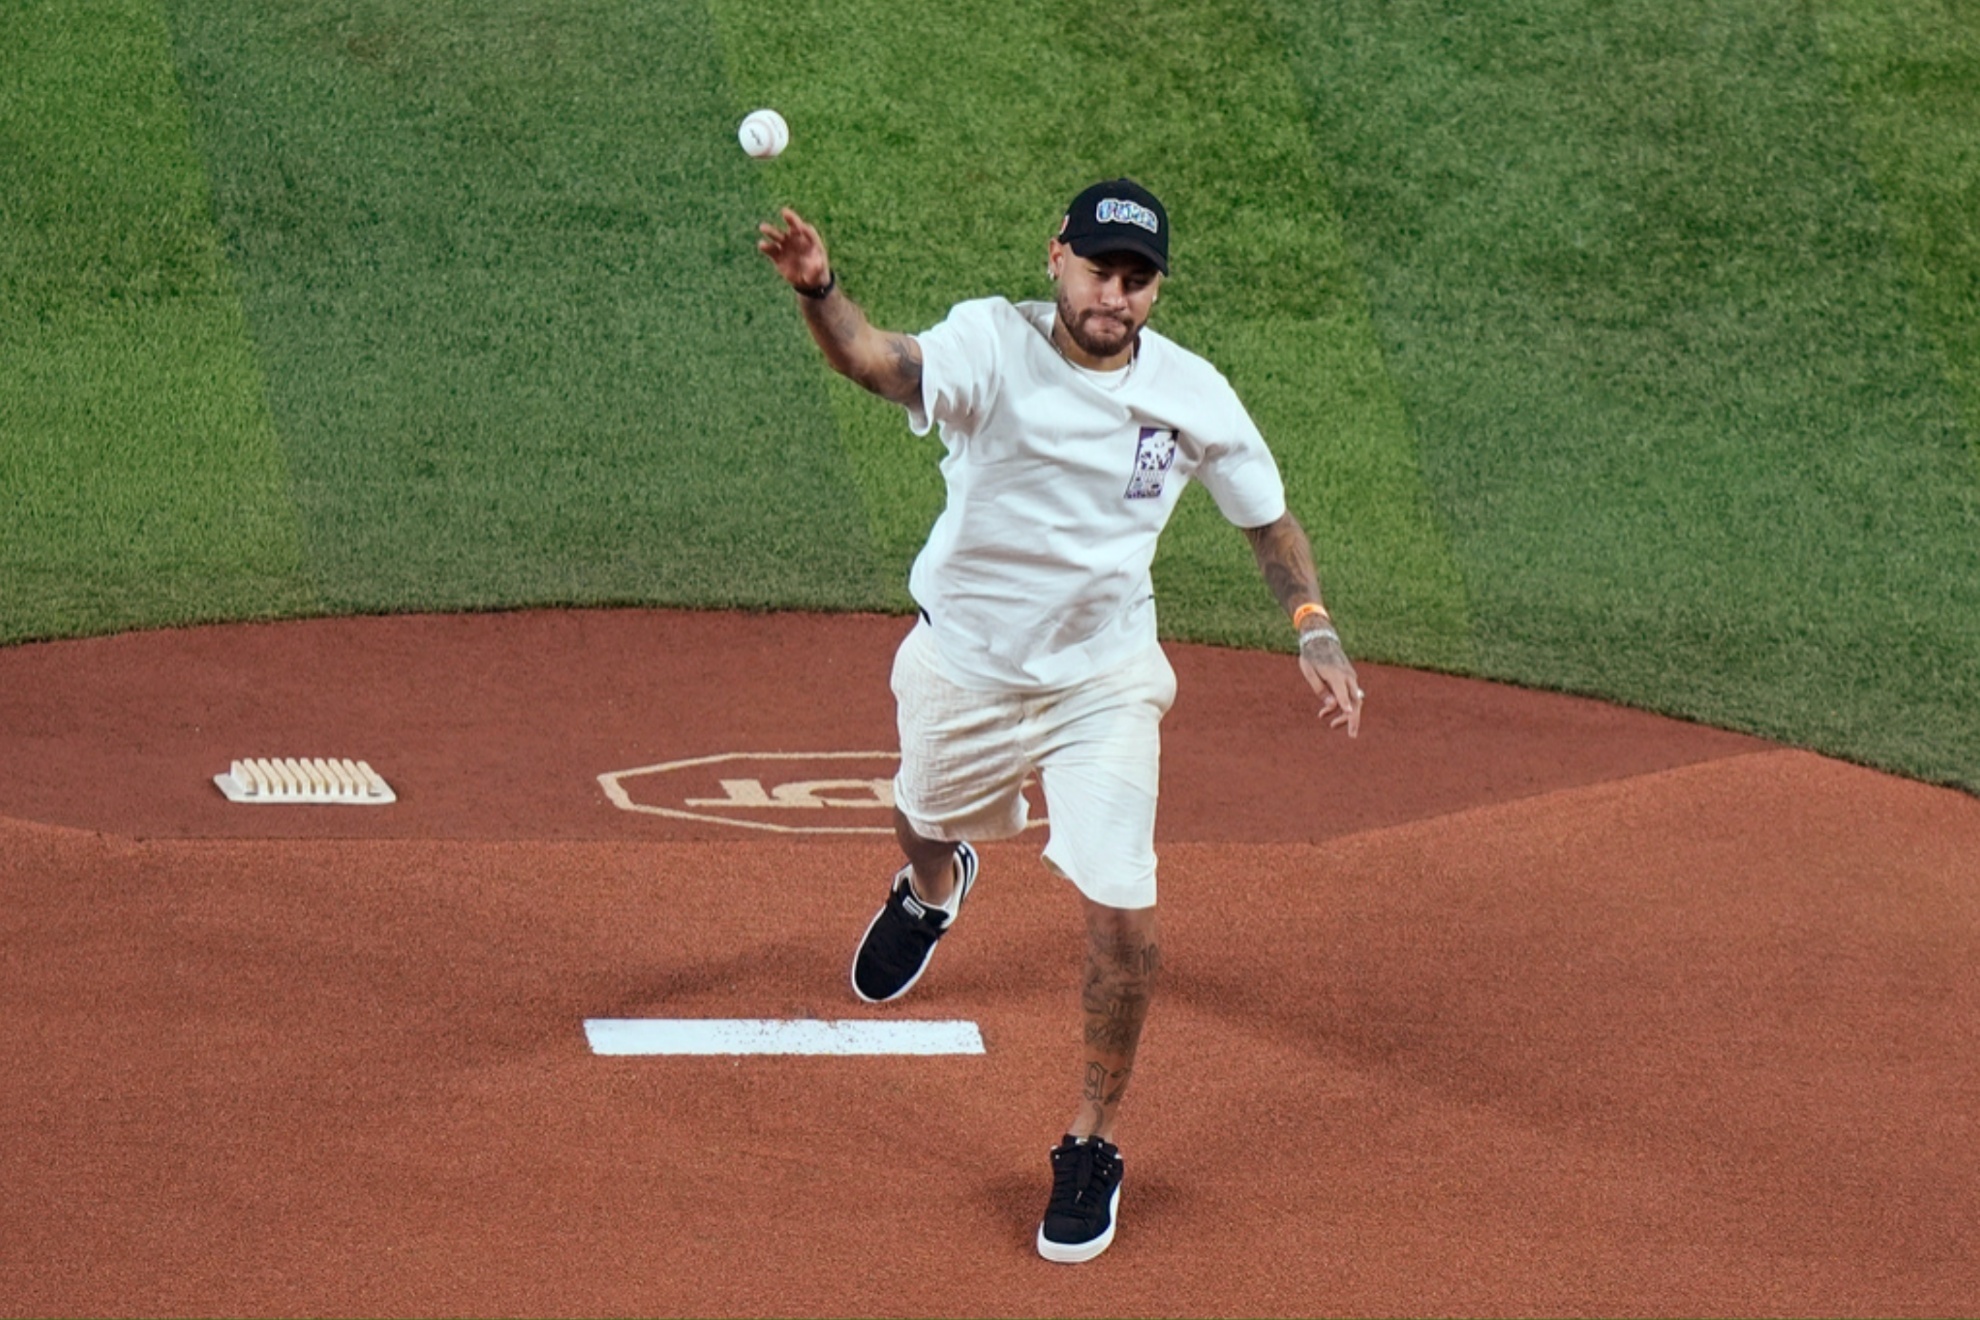 Neymar Jr. threw the first pitch at the Marlins opening game against the Pirates